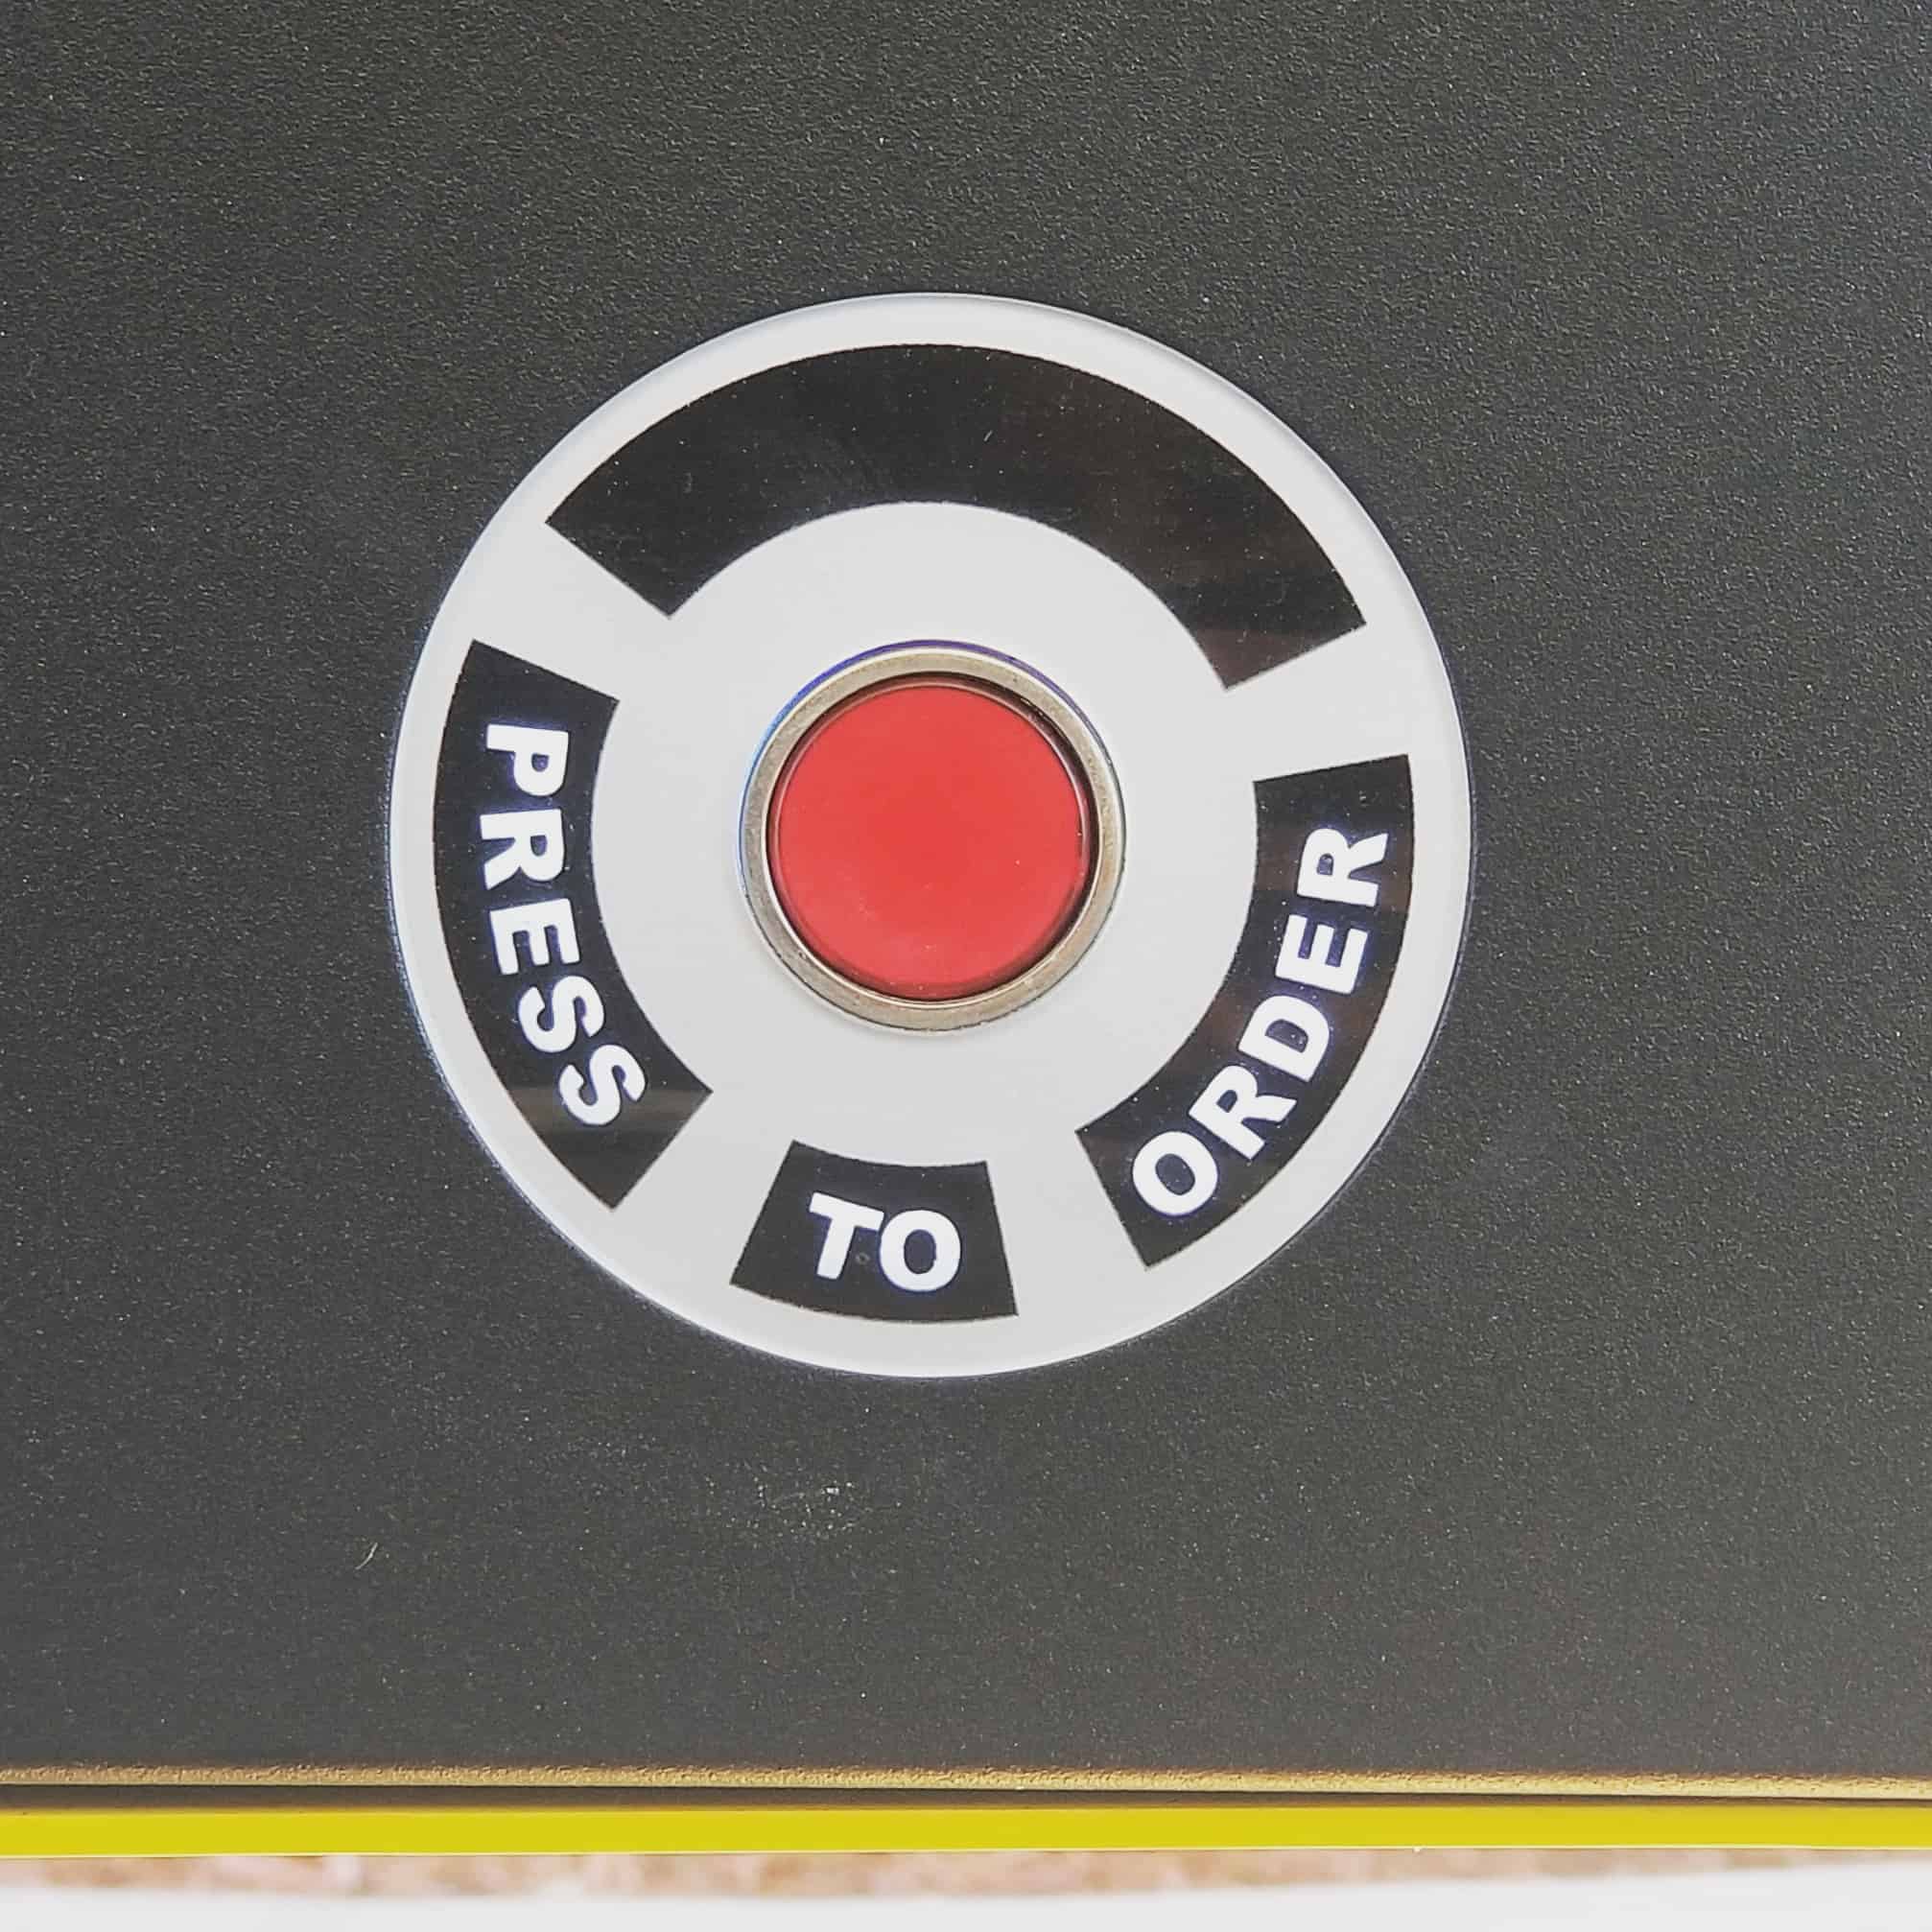 the red button